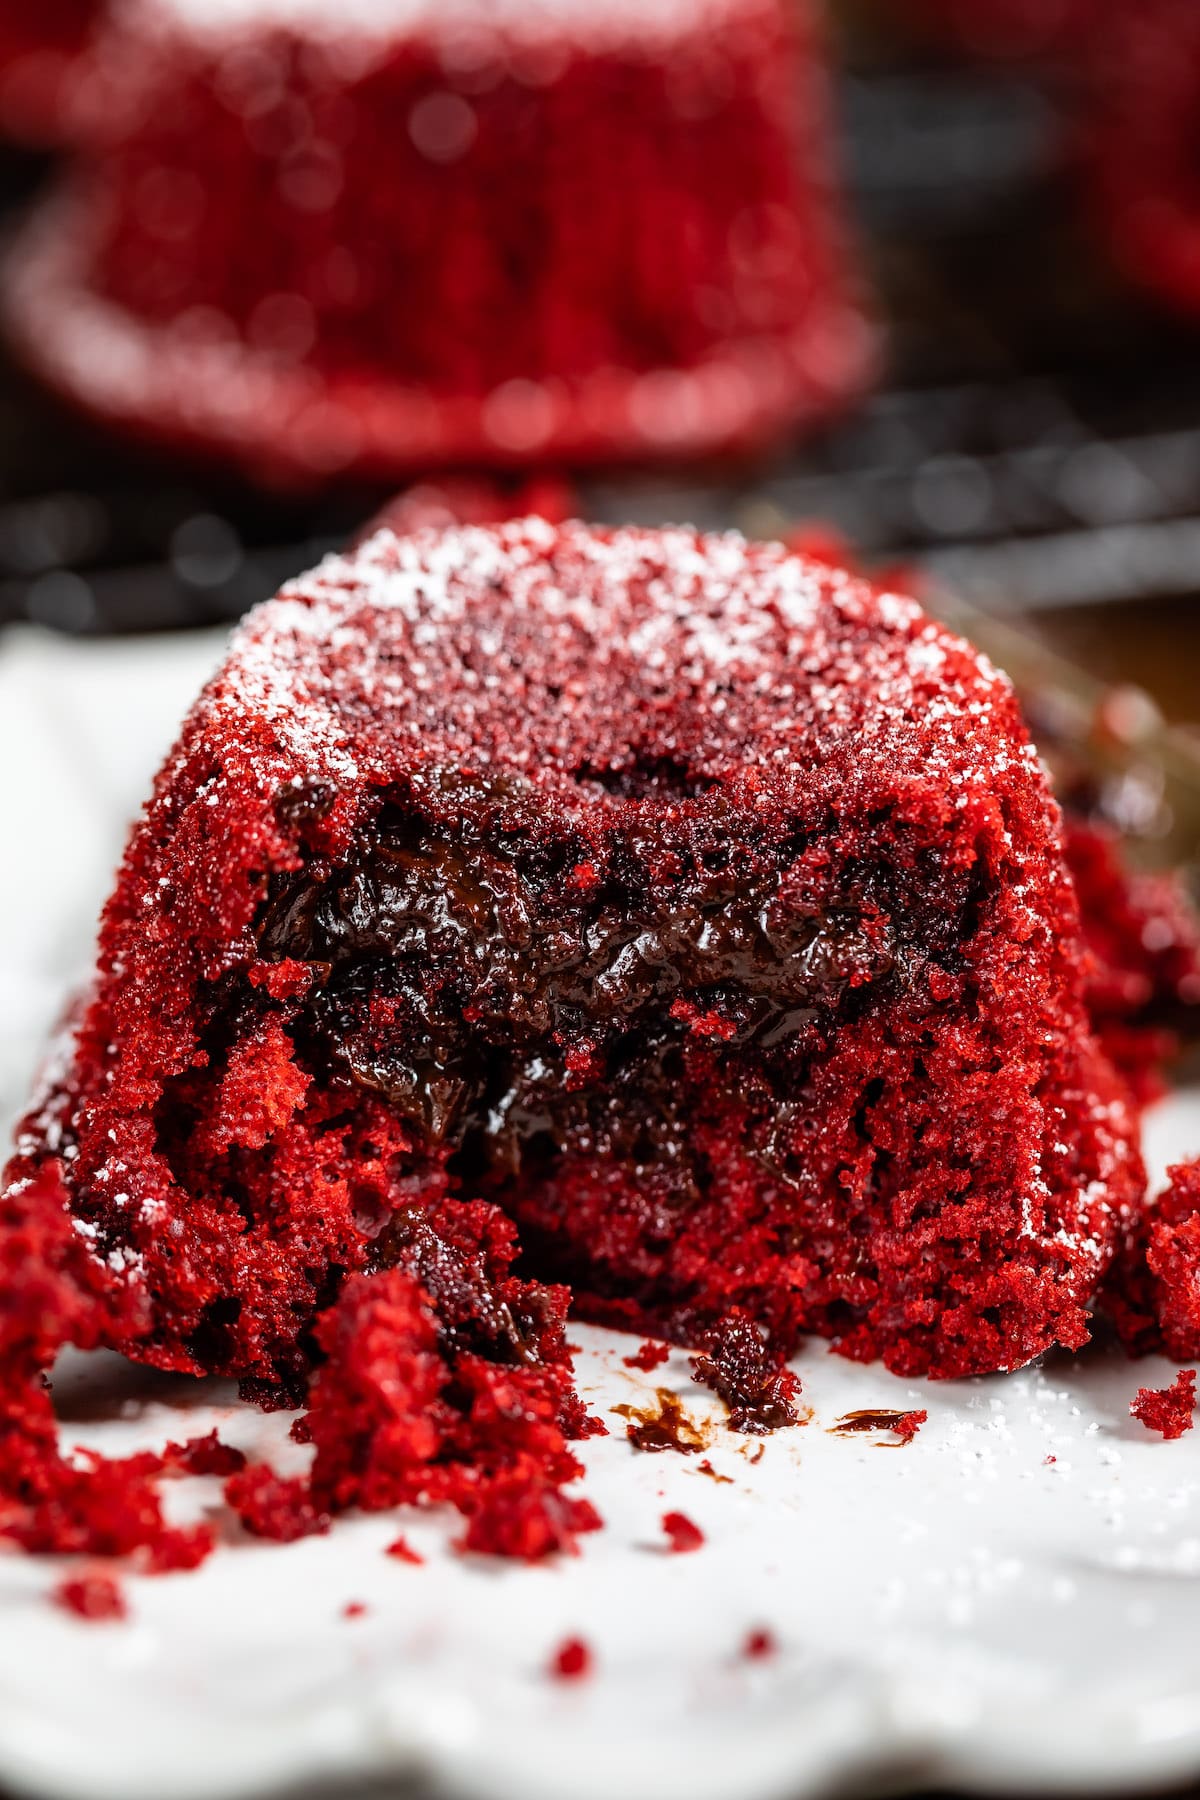 upside down red velvet cupcake with chocolate filling